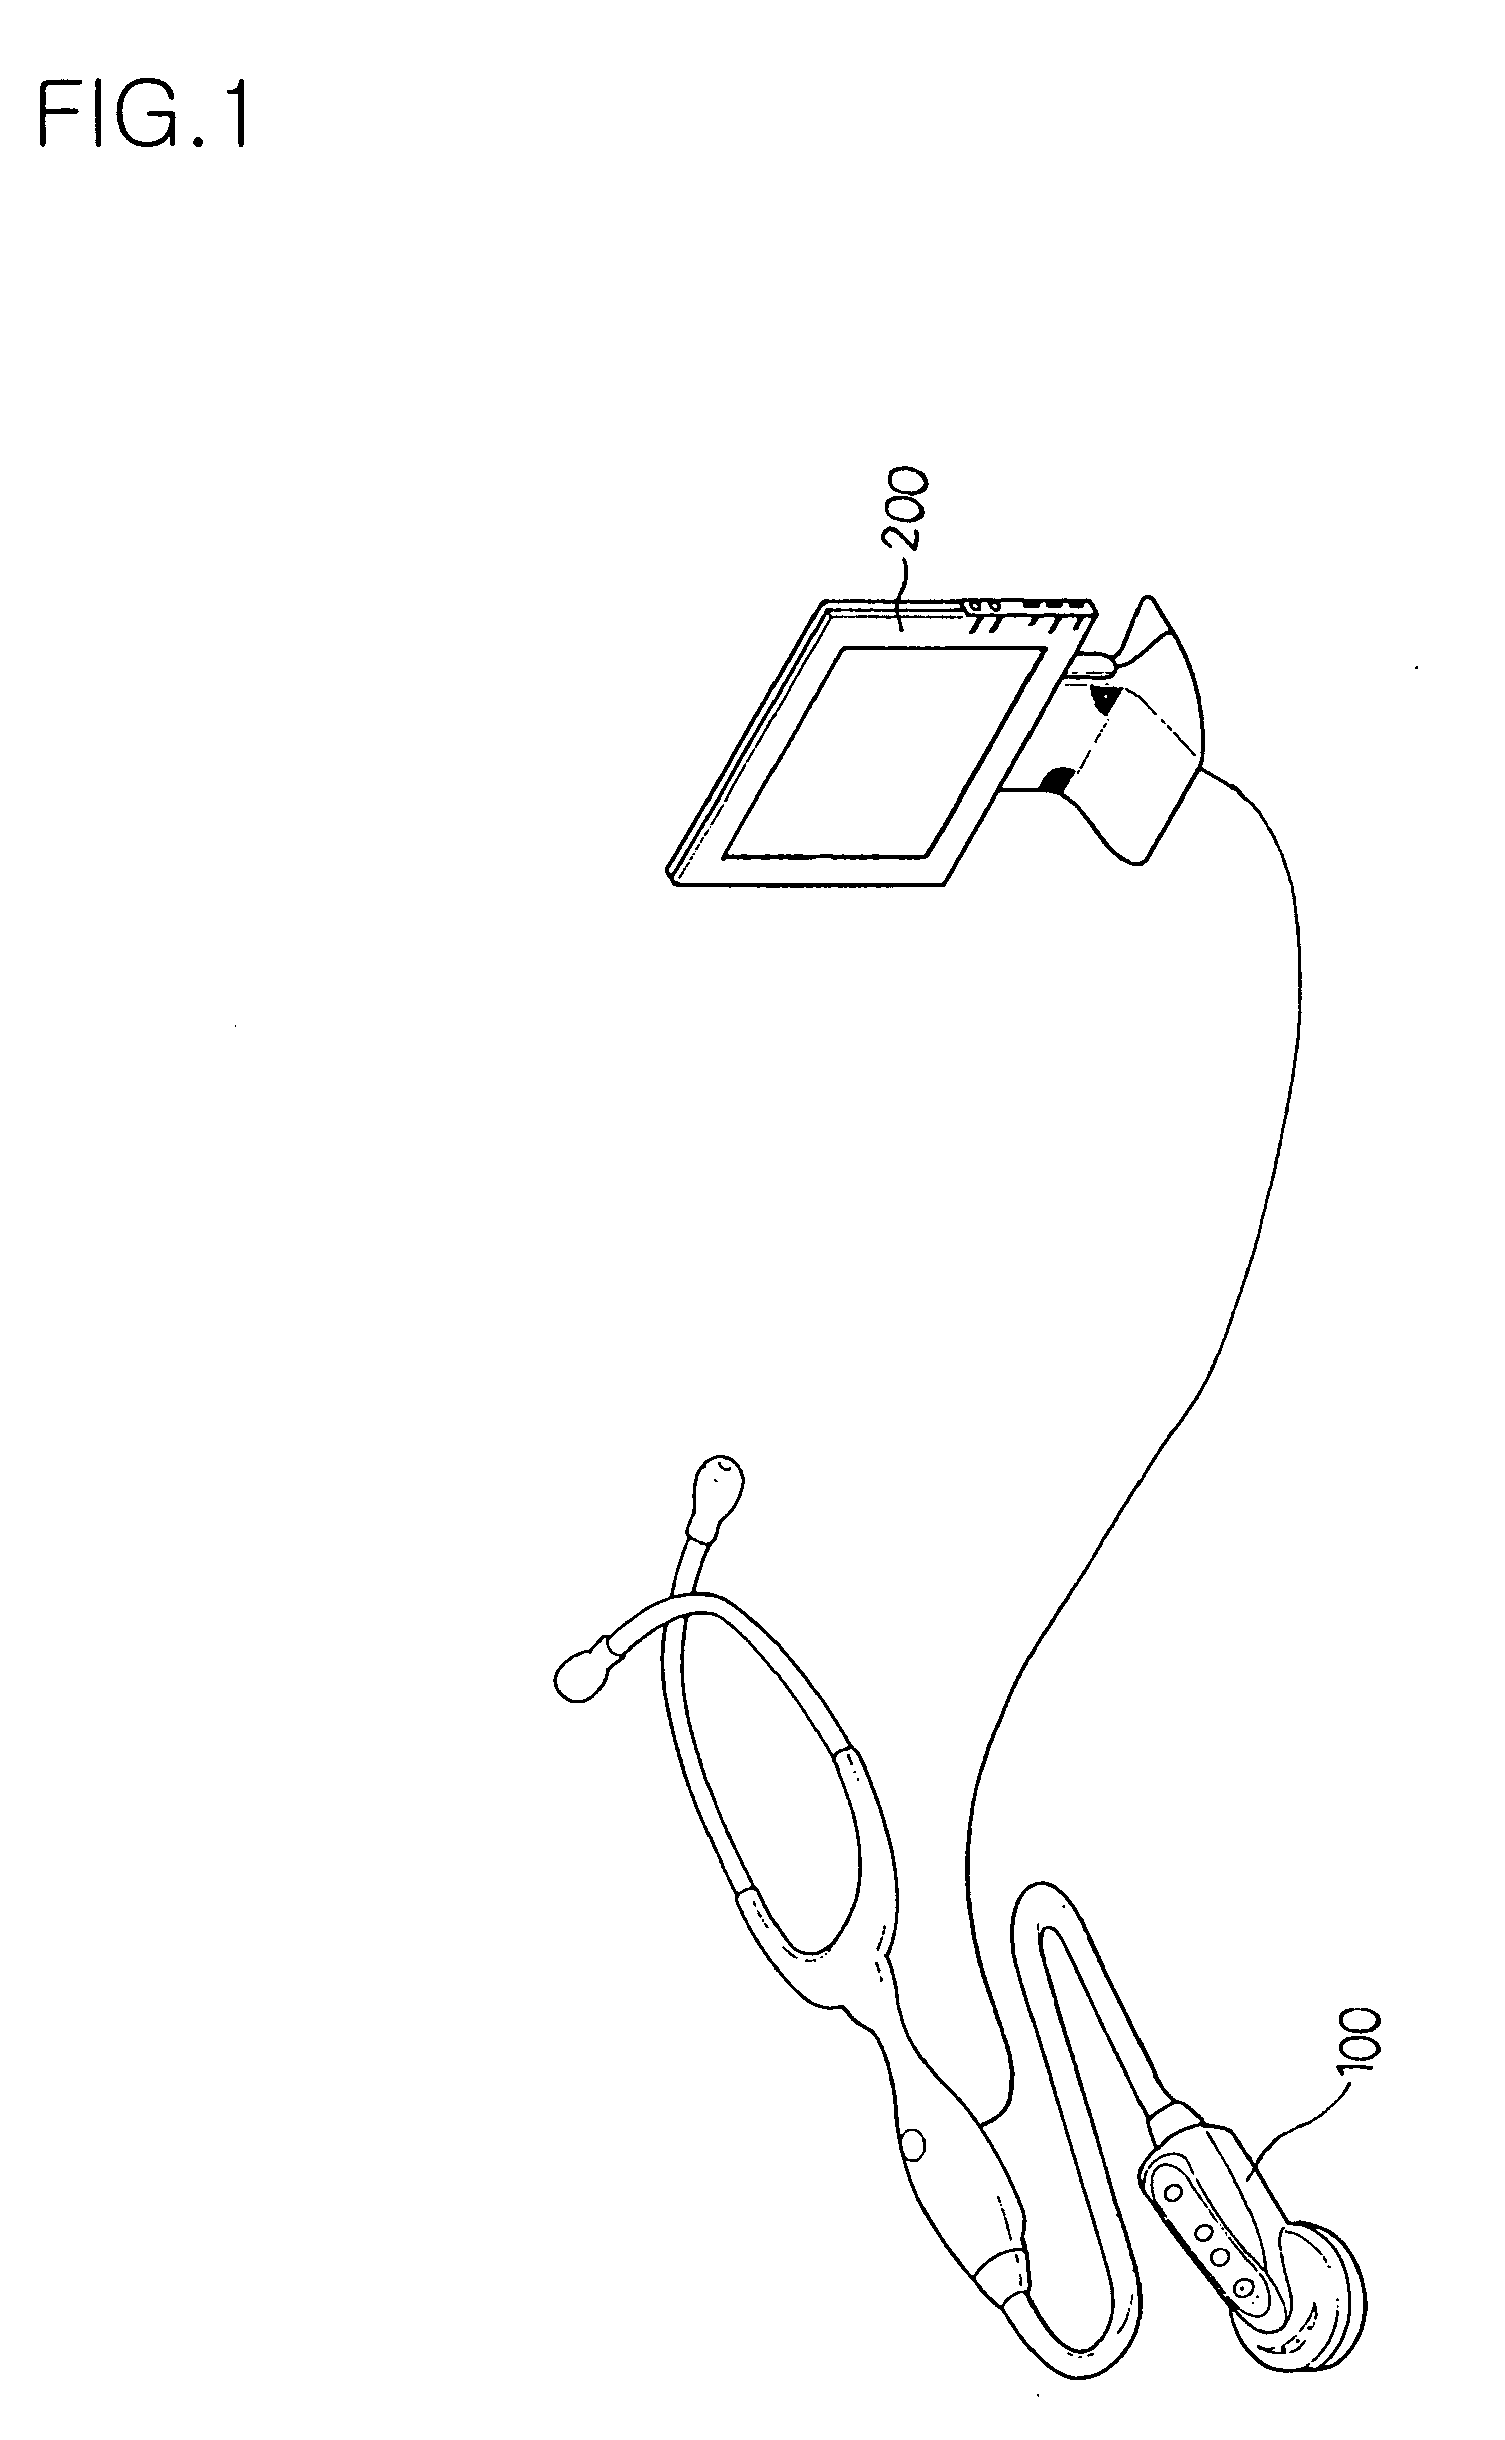 System for outputting acoustic signal from a stethoscope